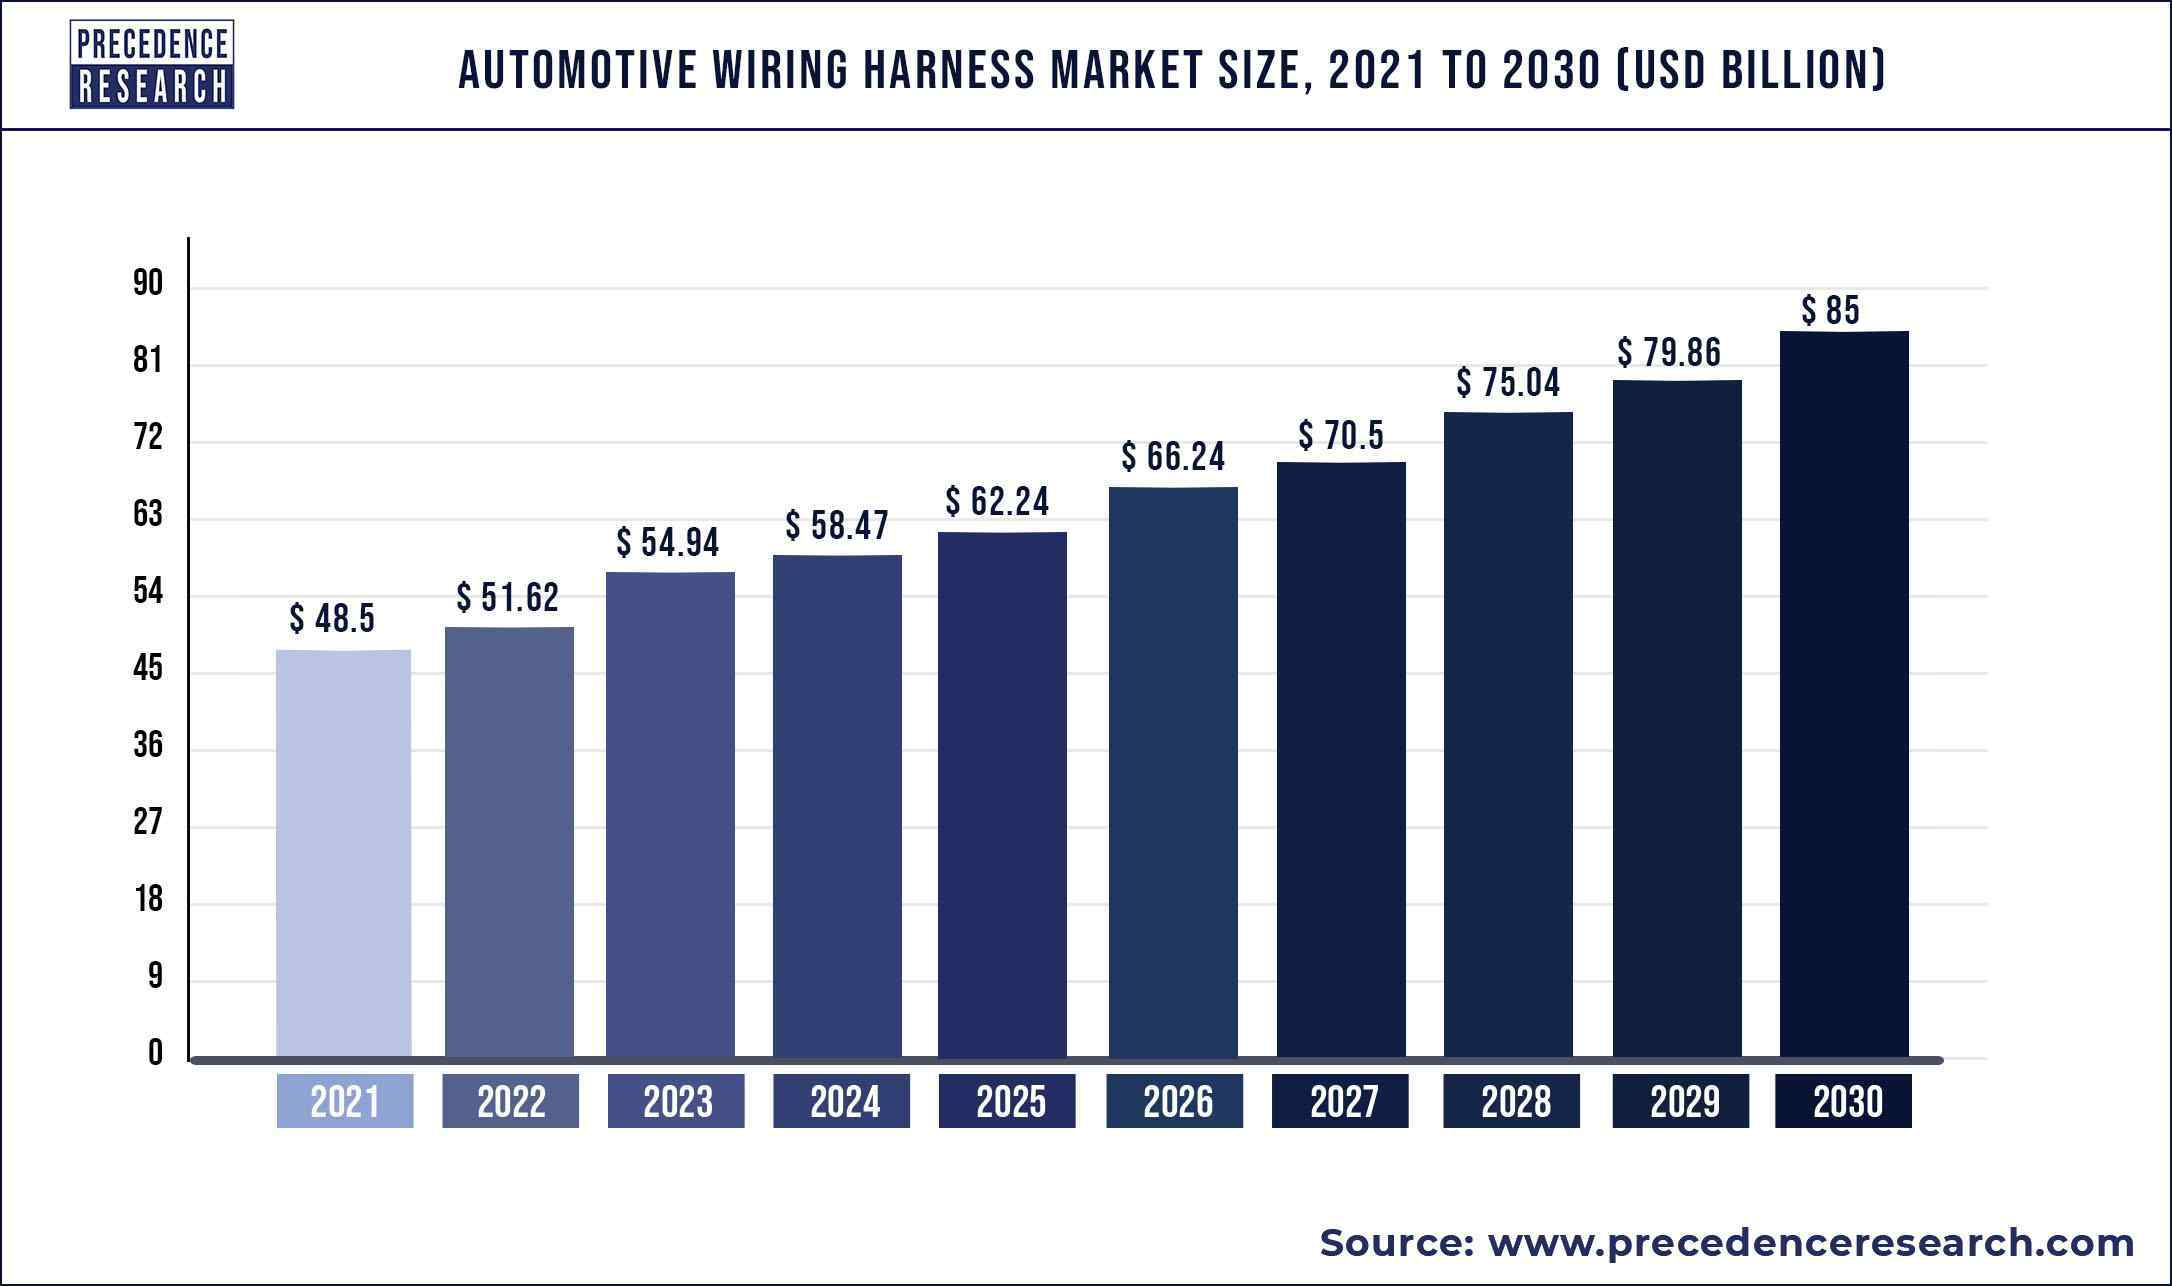 Automotive Wiring Harness Market Size 2021 To 2030